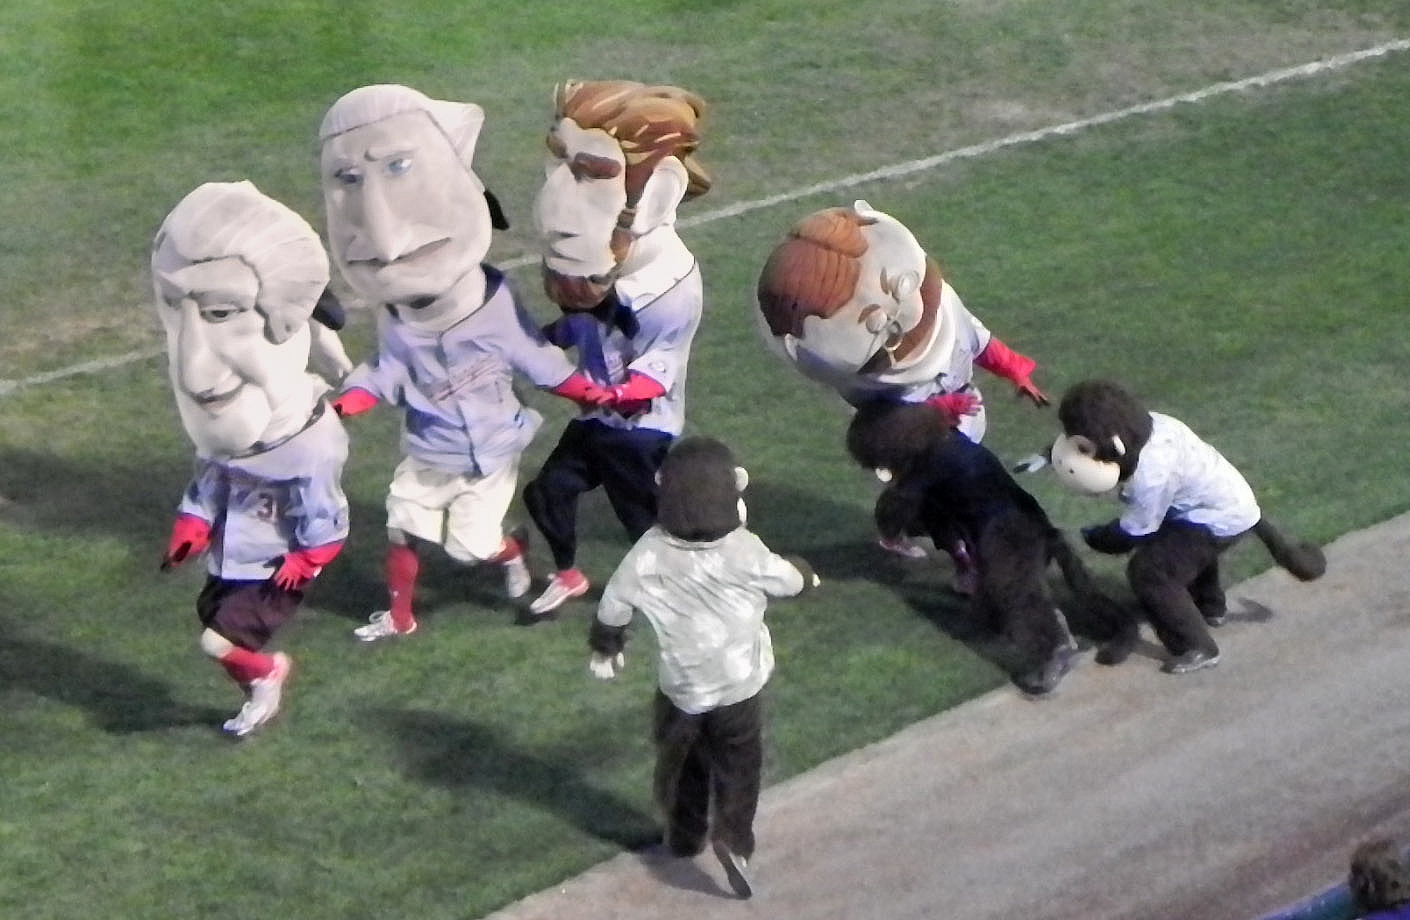 Video: Nats fans meet Stephen Strasmonkey, who promptly tackles Teddy – LET  TEDDY WIN